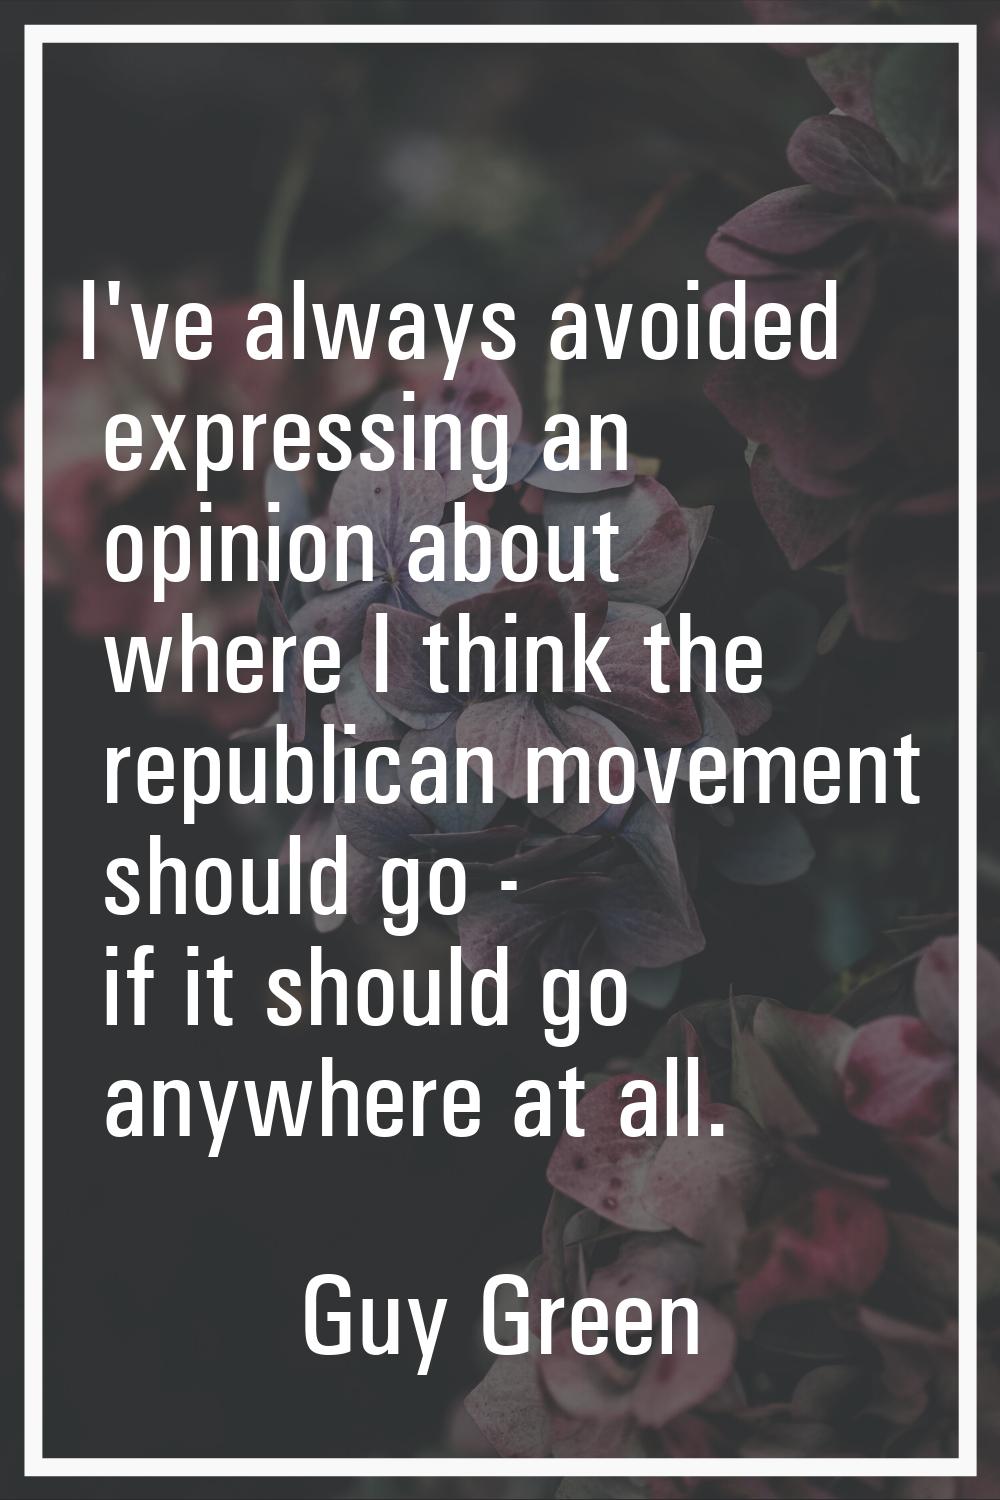 I've always avoided expressing an opinion about where I think the republican movement should go - i